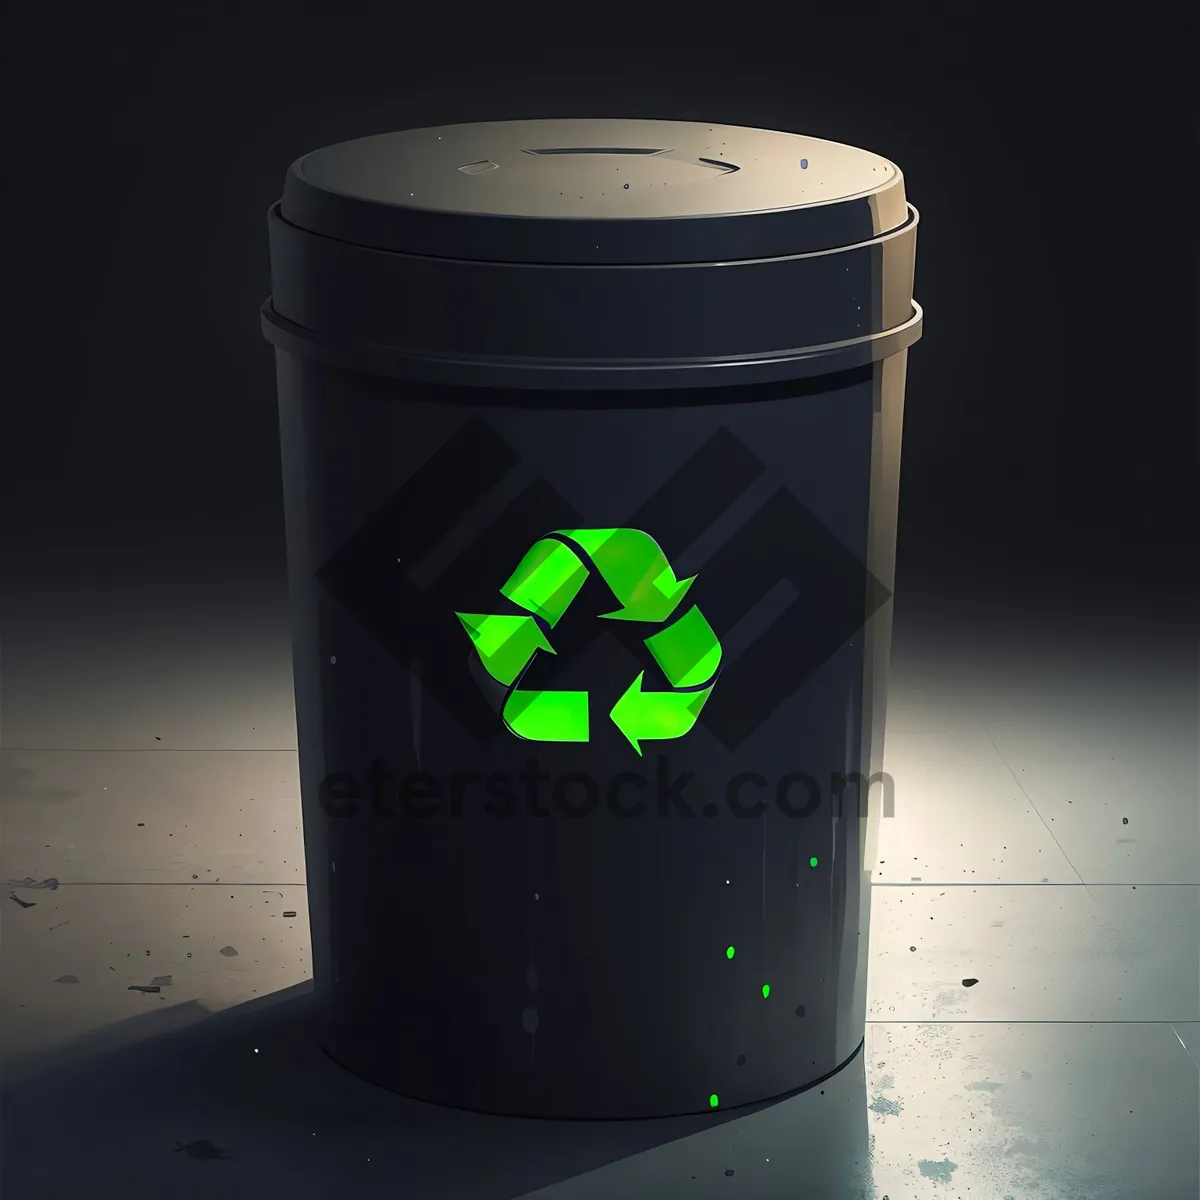 Picture of Drink bin - Convenient container for disposing of garbage.